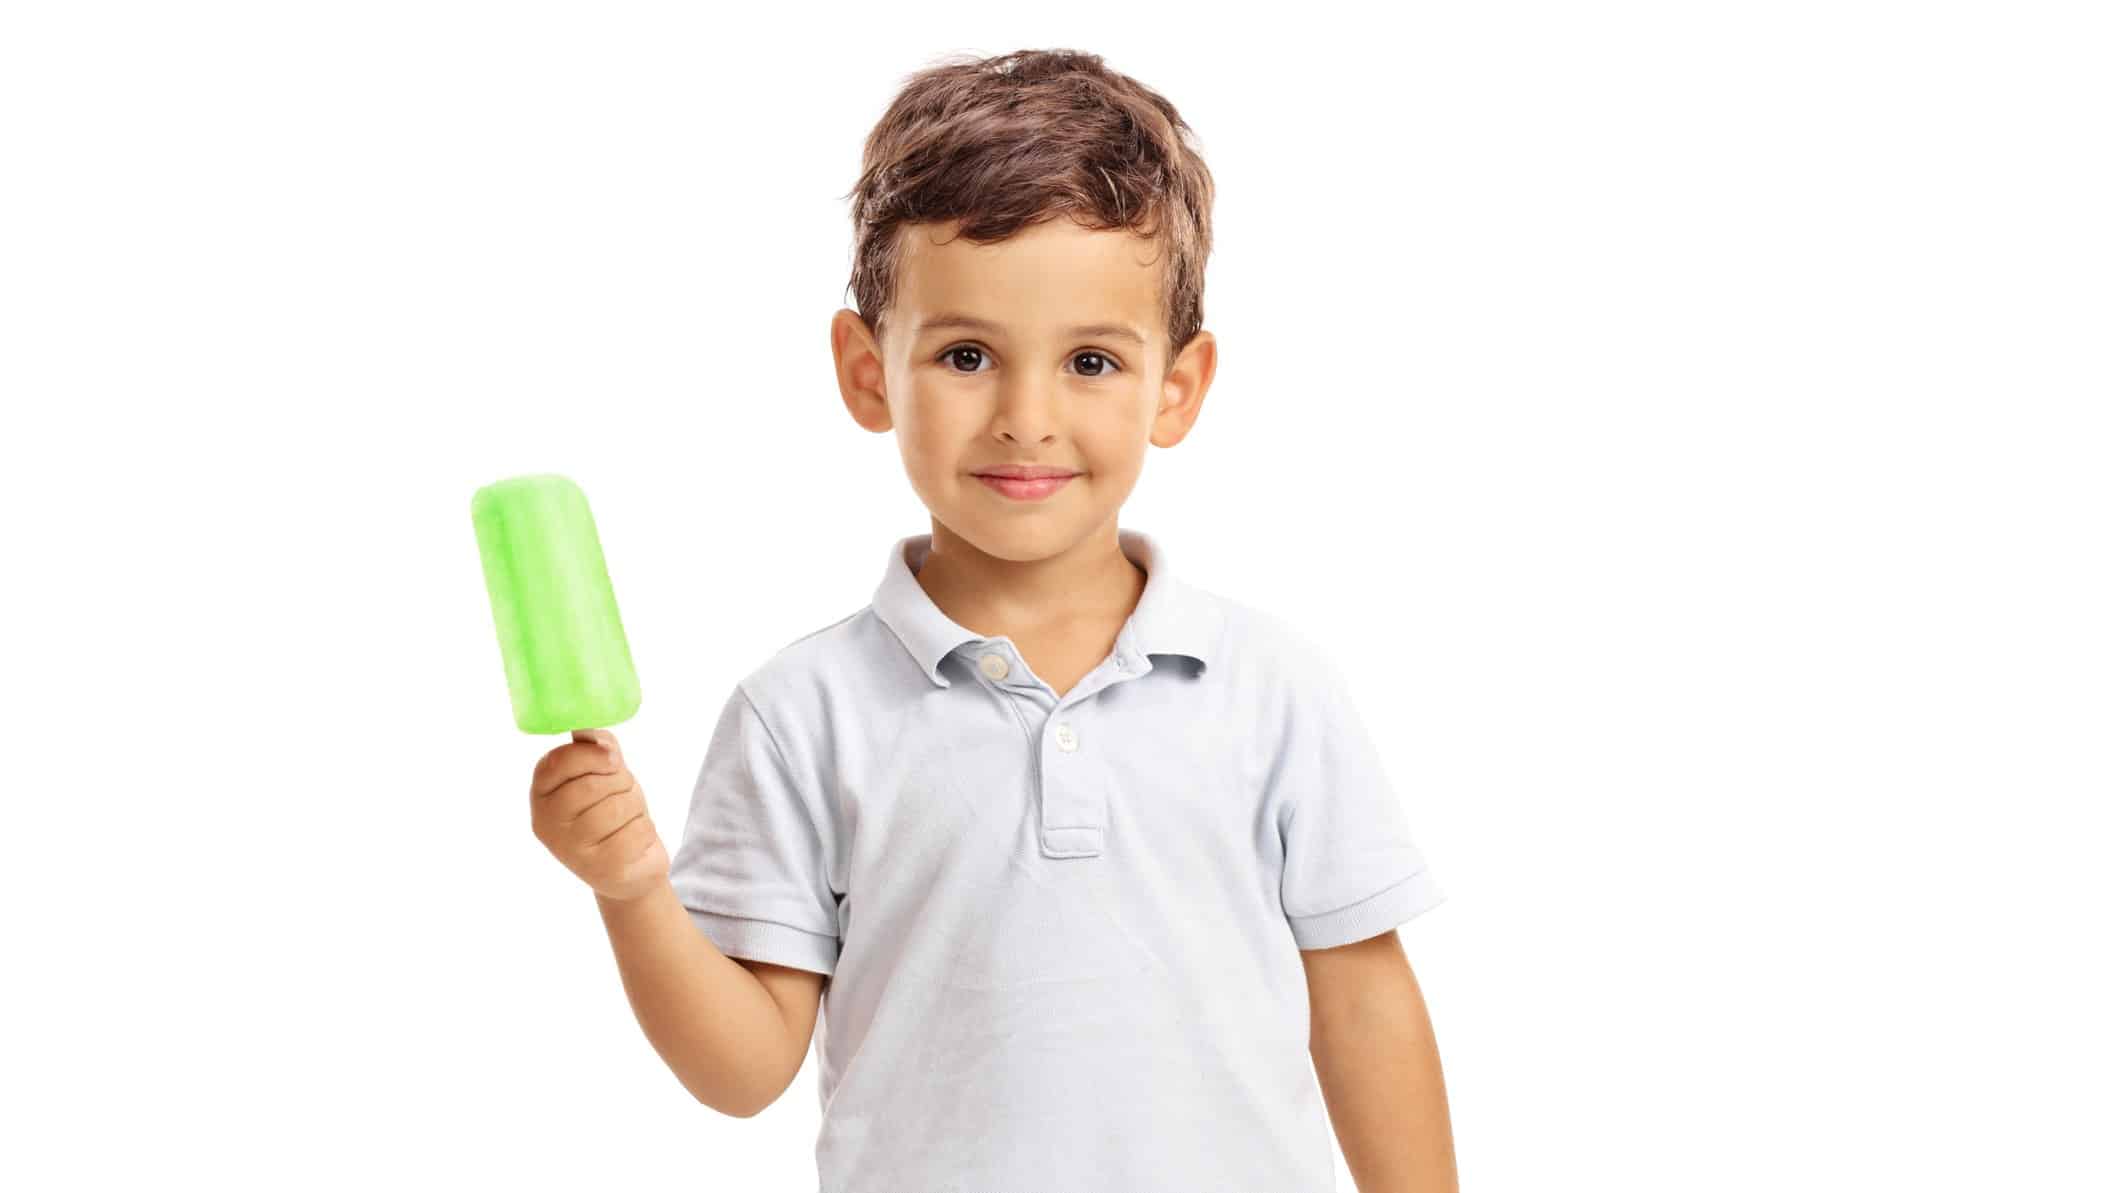 A cute little boy smiles sweetly at the camera while holding up a green ice block.